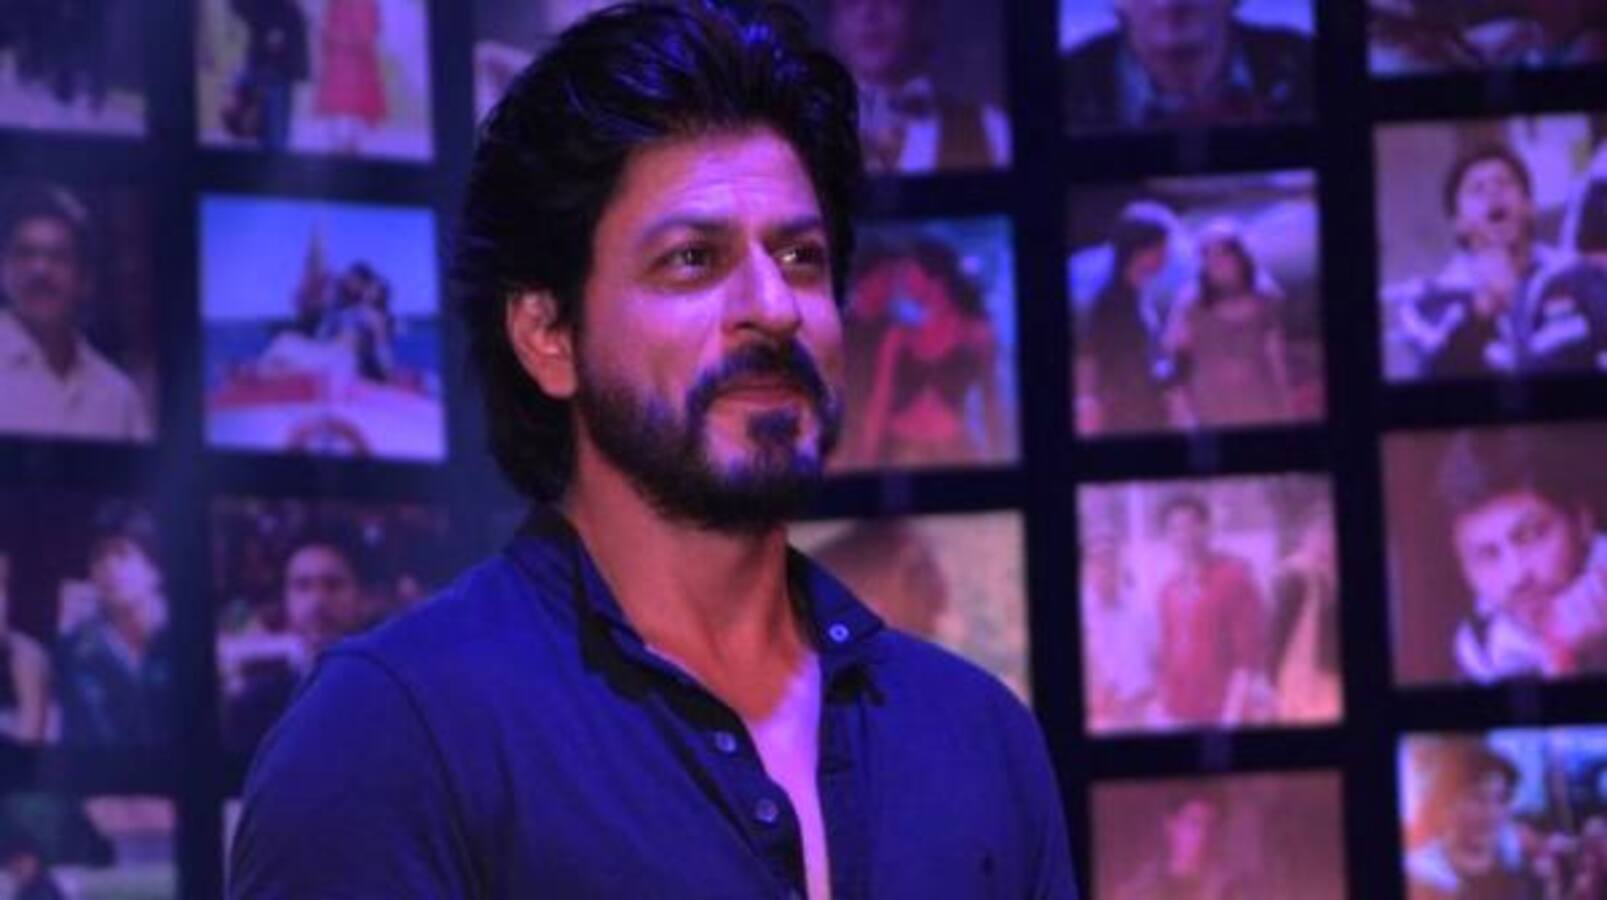 Shah Rukh Khan THANKS his 20 million fans with this heartfelt message - watch video!